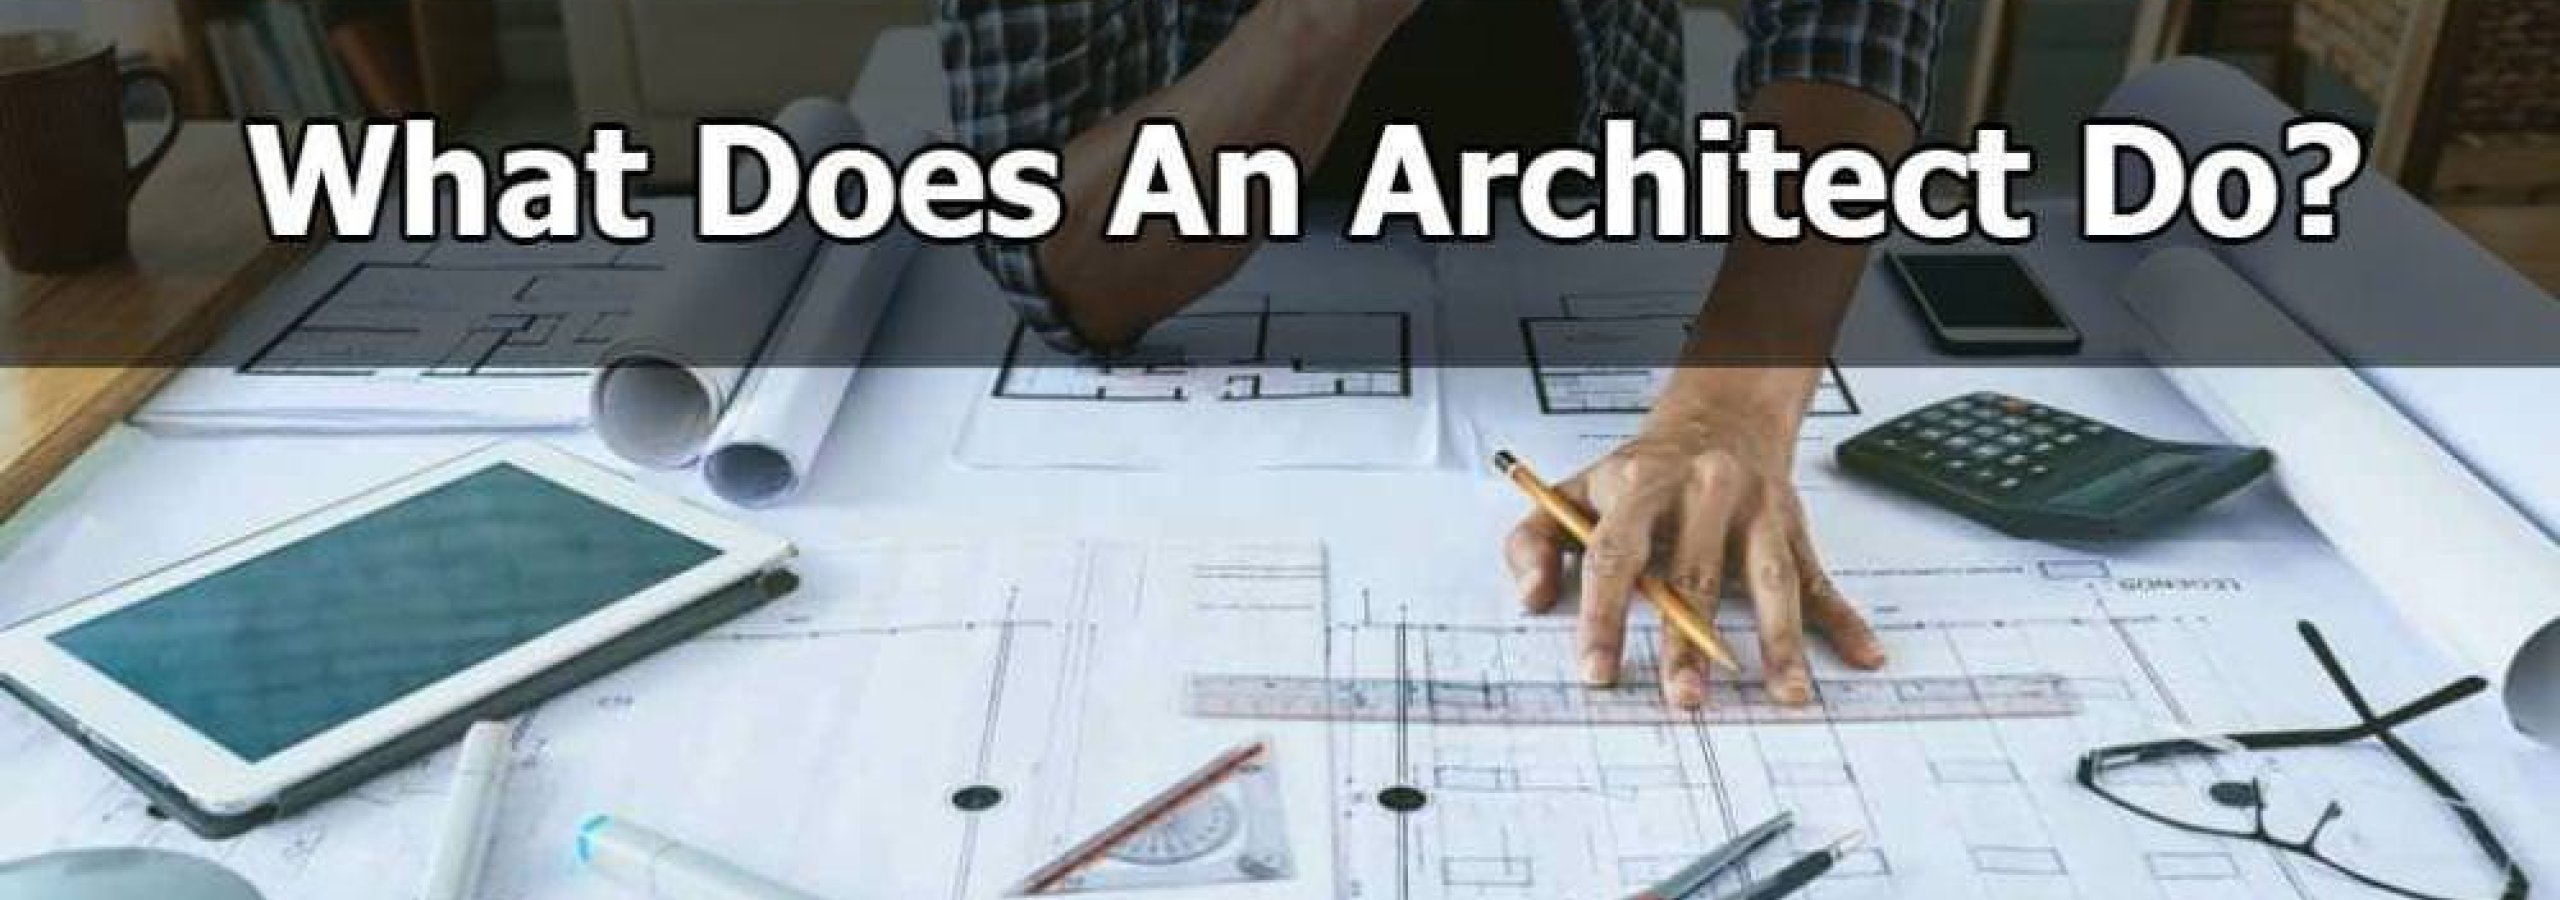 What does an Architect Do